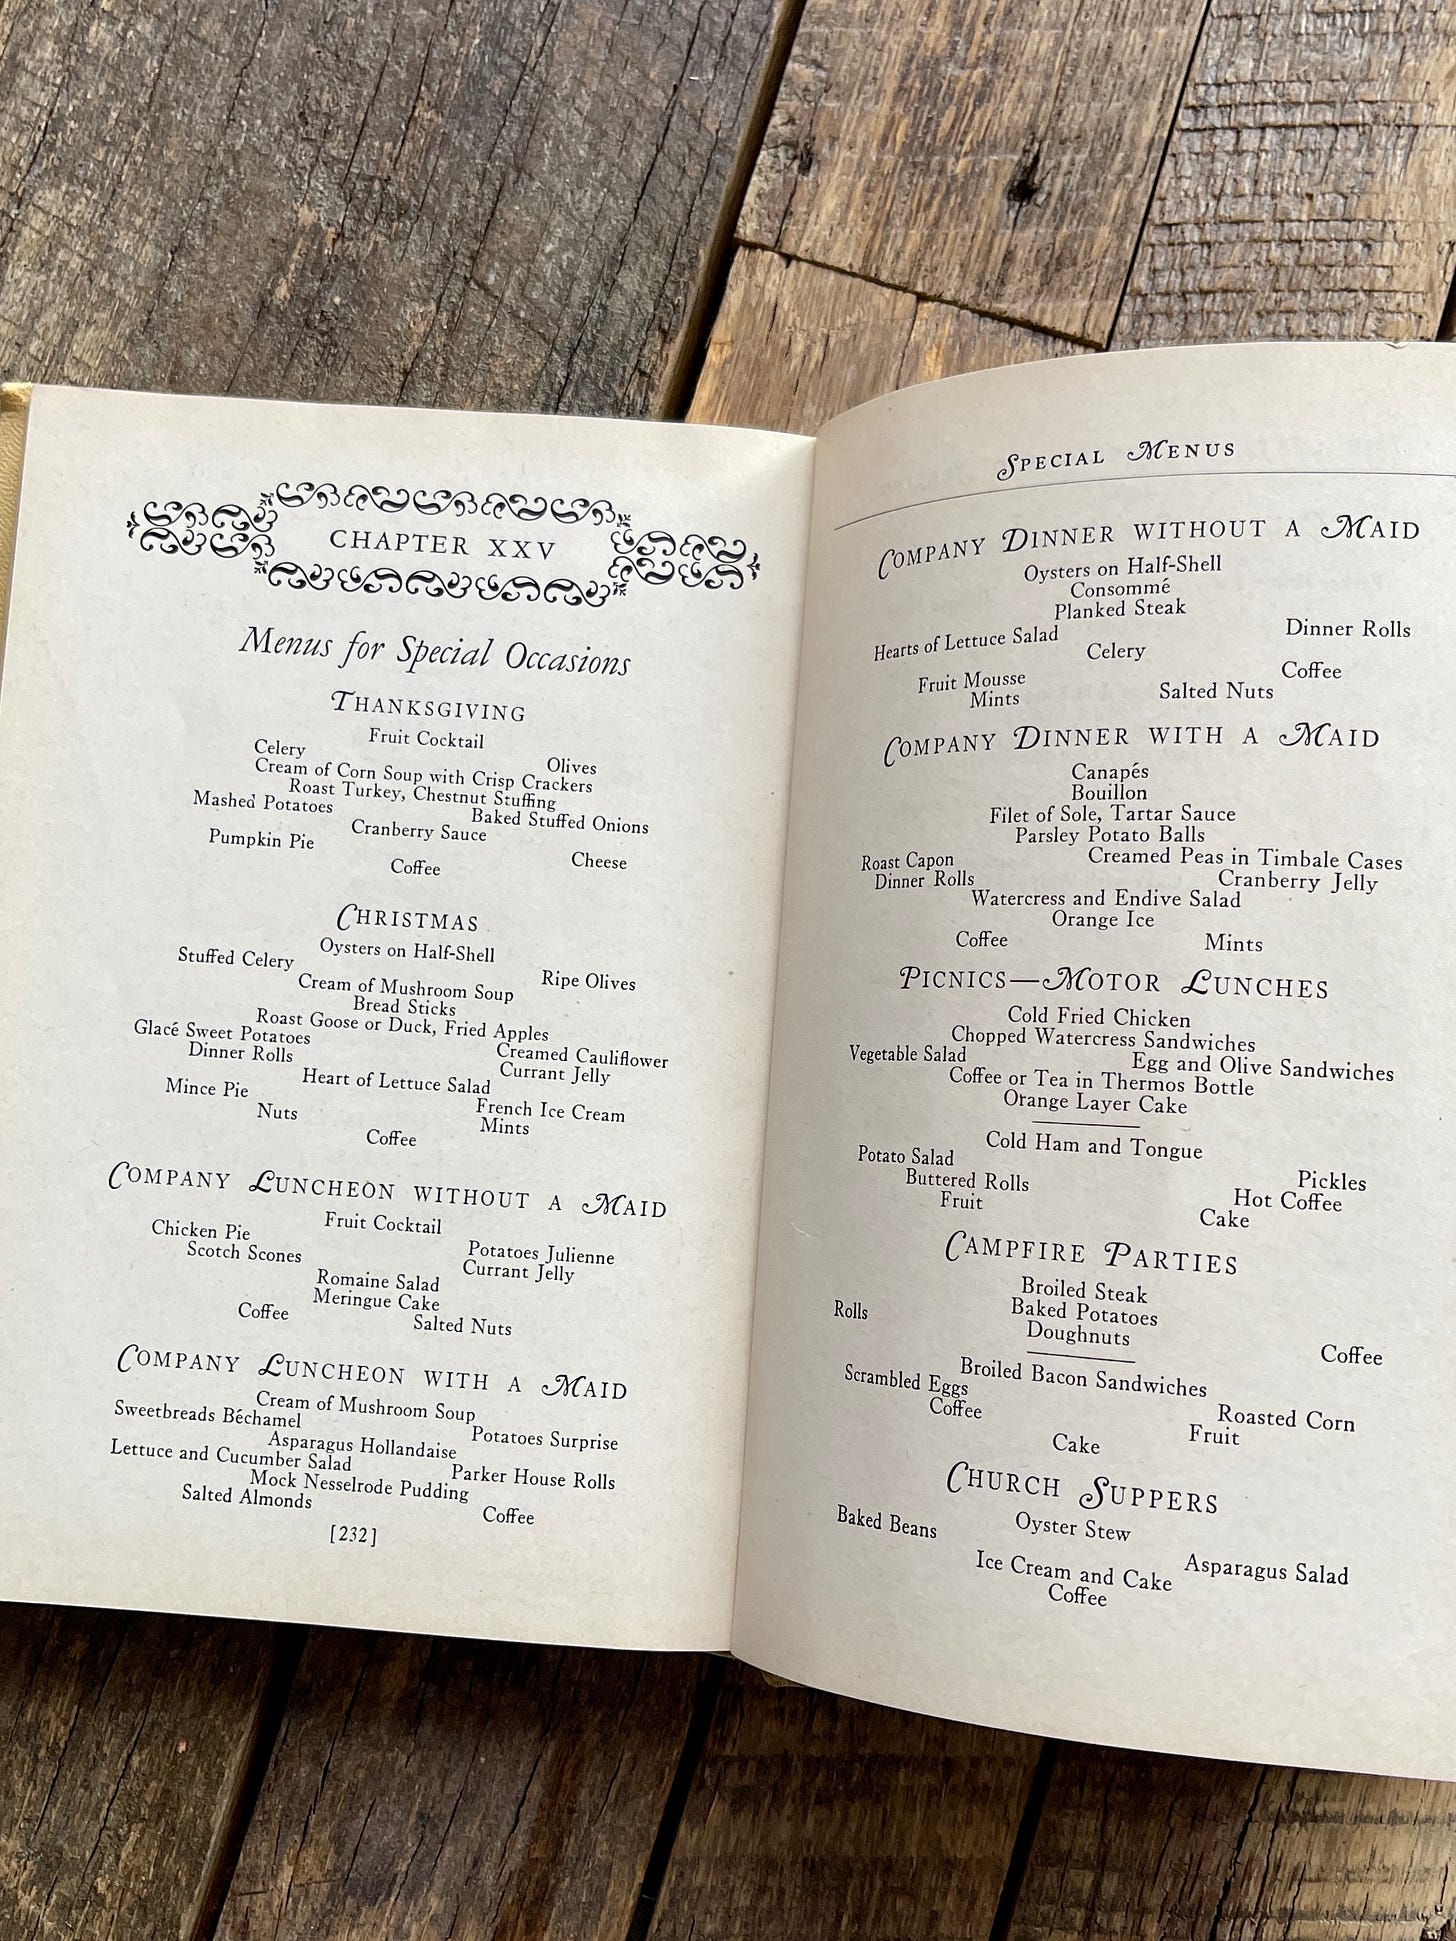 The Art of Cooking and Serving by Sarah Field Splint menus for special occasions pages